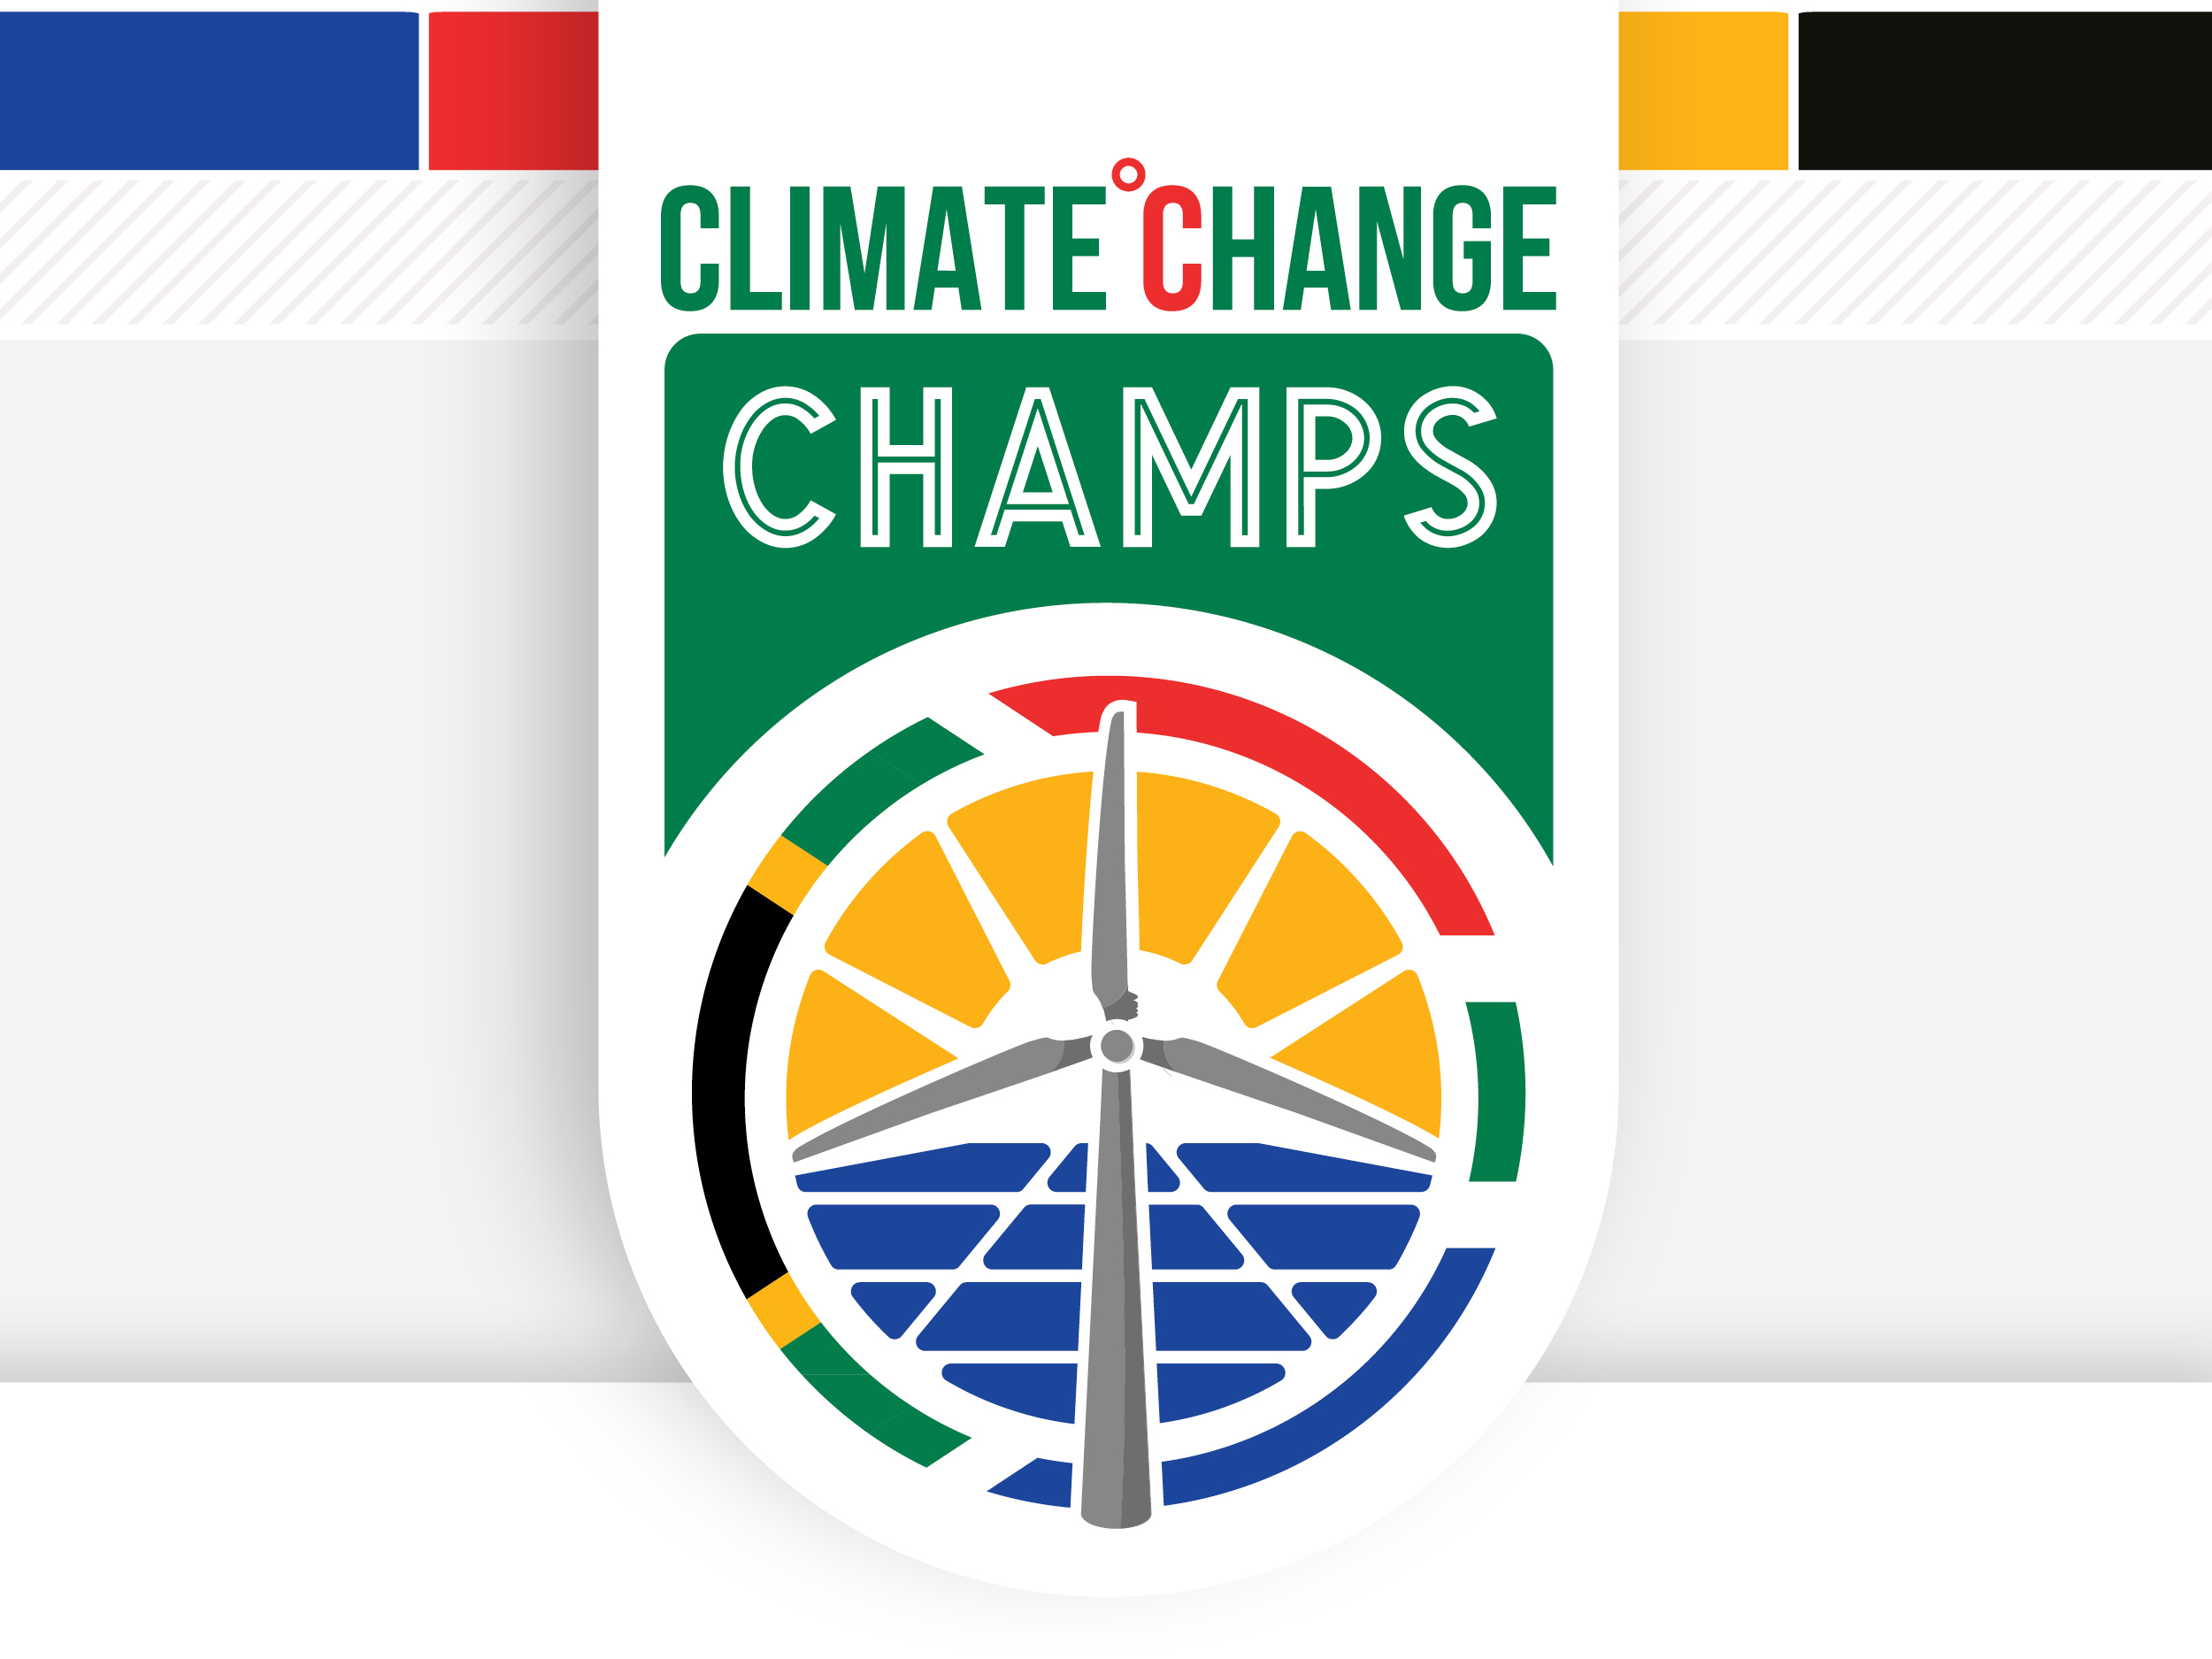 Climate Change Champs